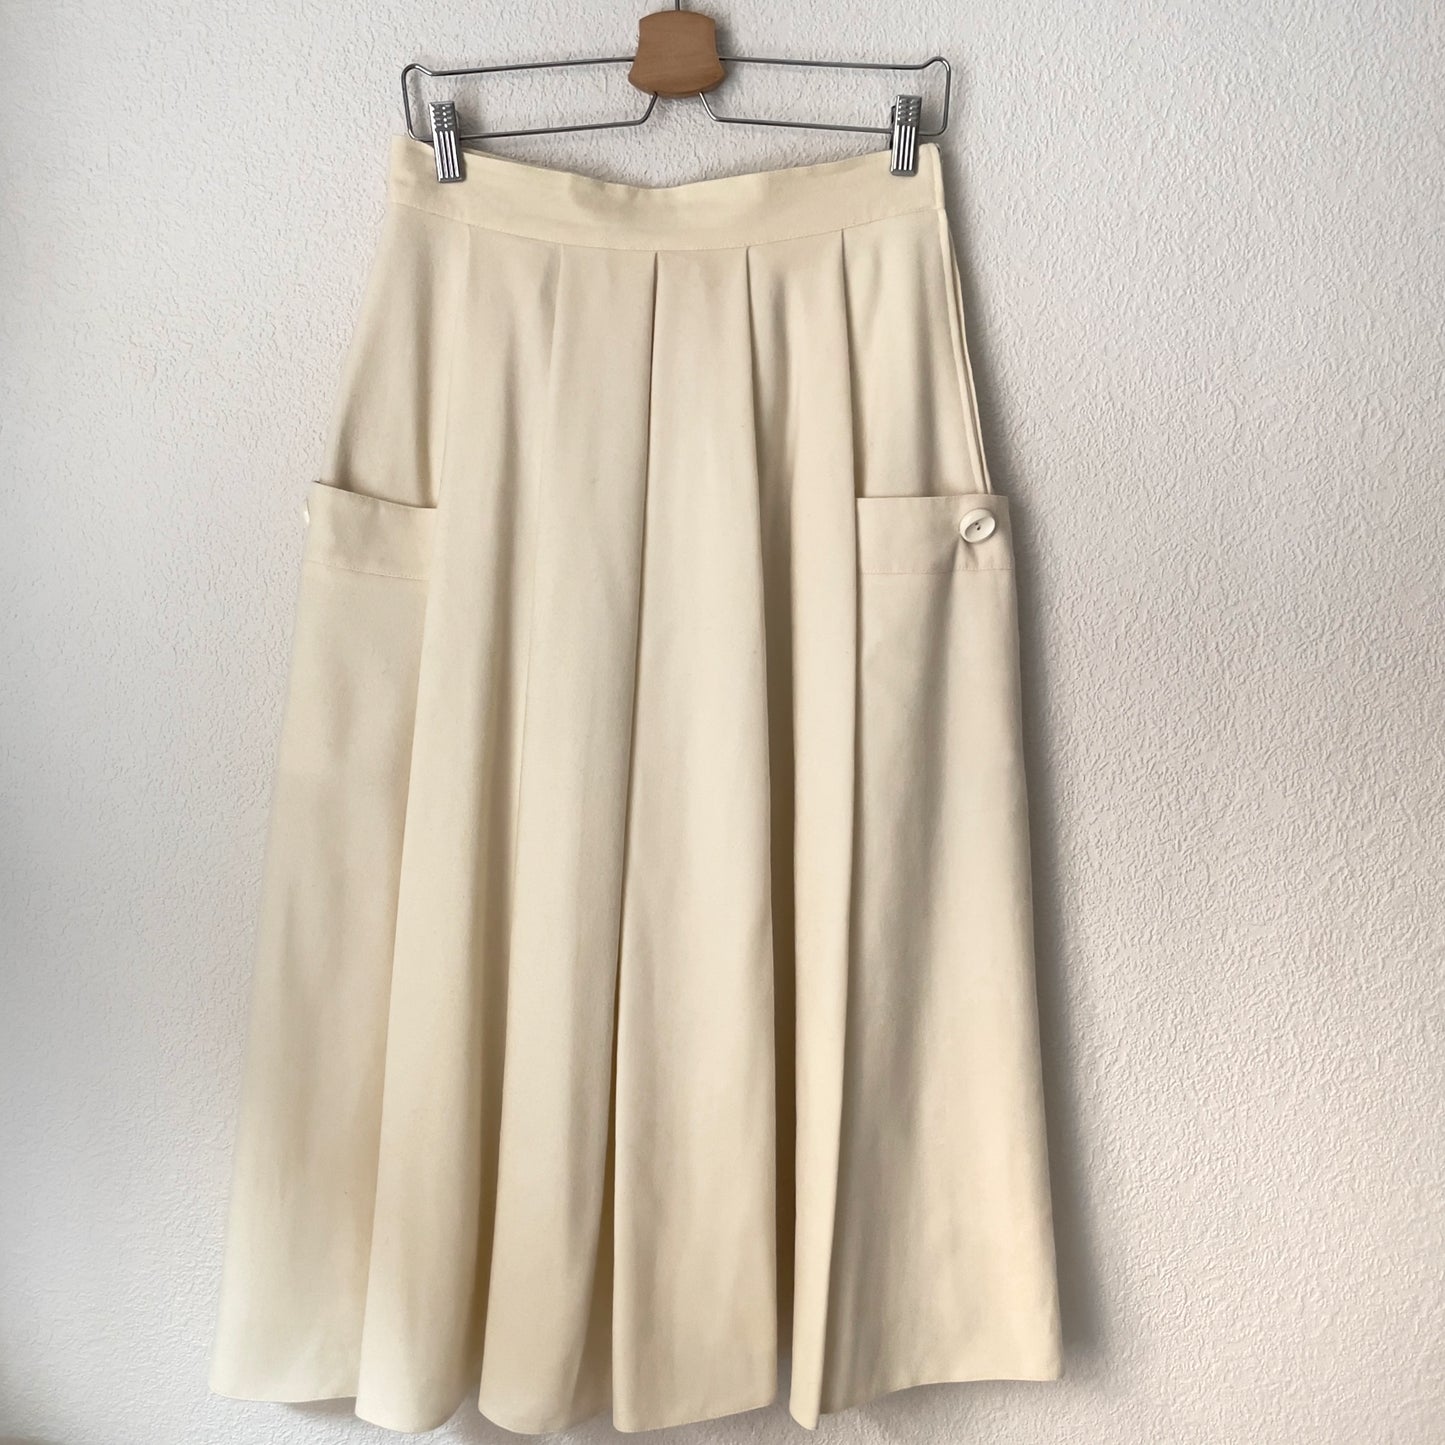 Vintage Pure Wool Skirt - Betty Barclay